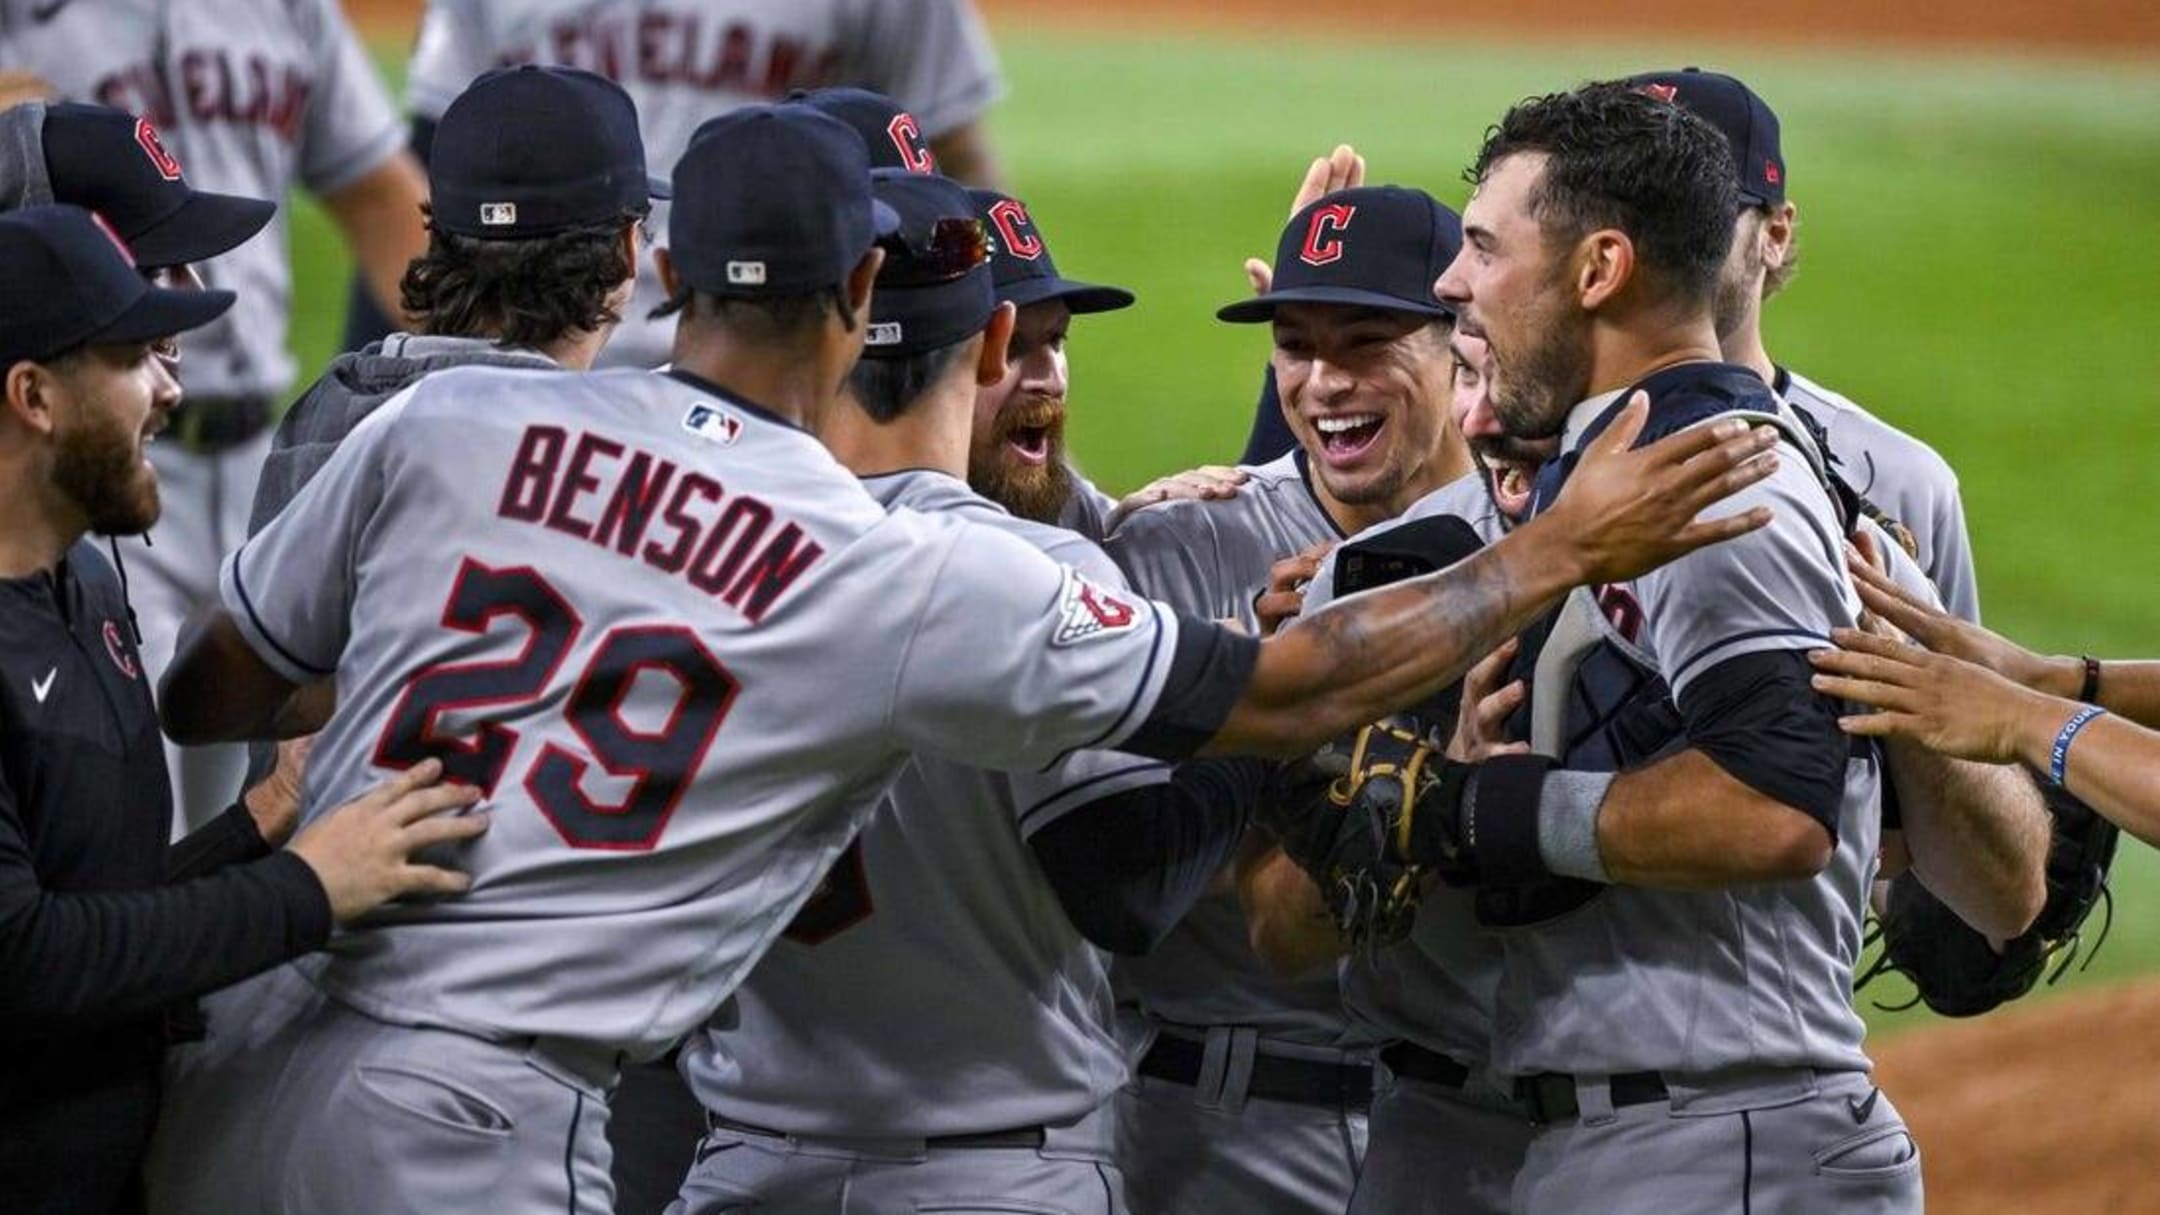 Chicago White Sox: Cleveland Guardians clinch the AL Central